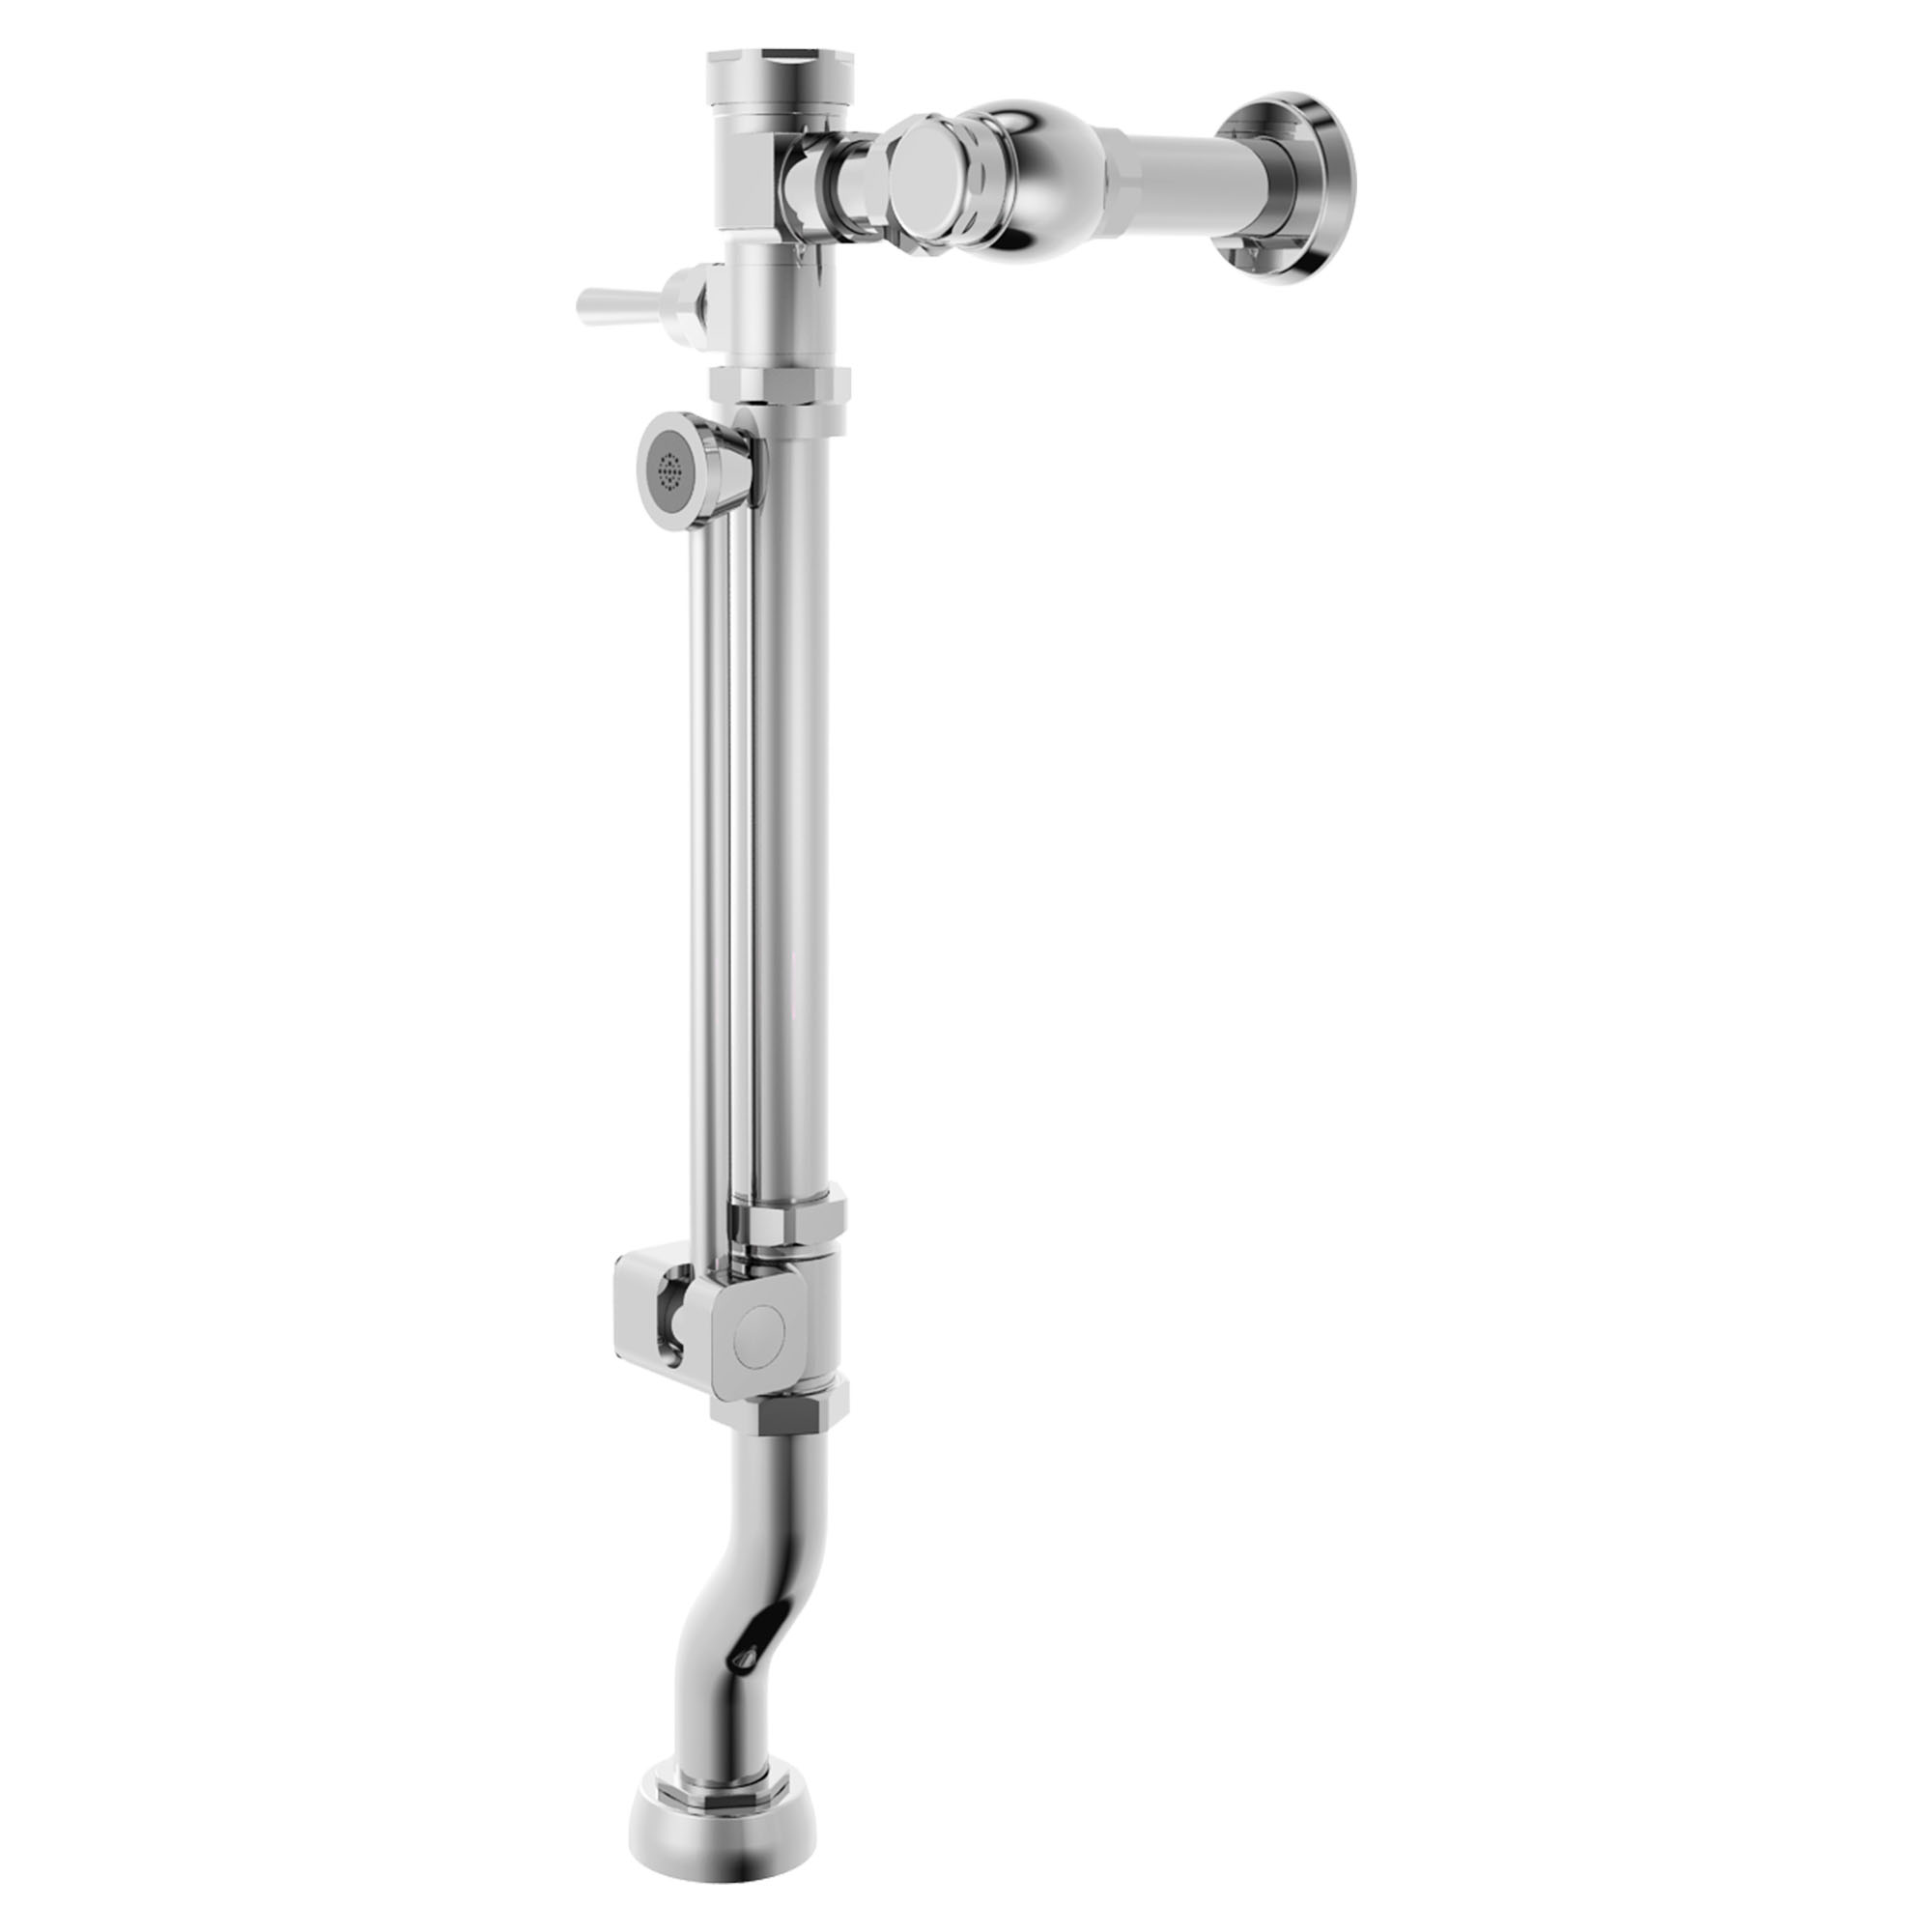 Ultima™ Manual Flush Valve With Bedpan Washer Assembly, Offset Tube, 1.6 gpf/6.0 Lpf